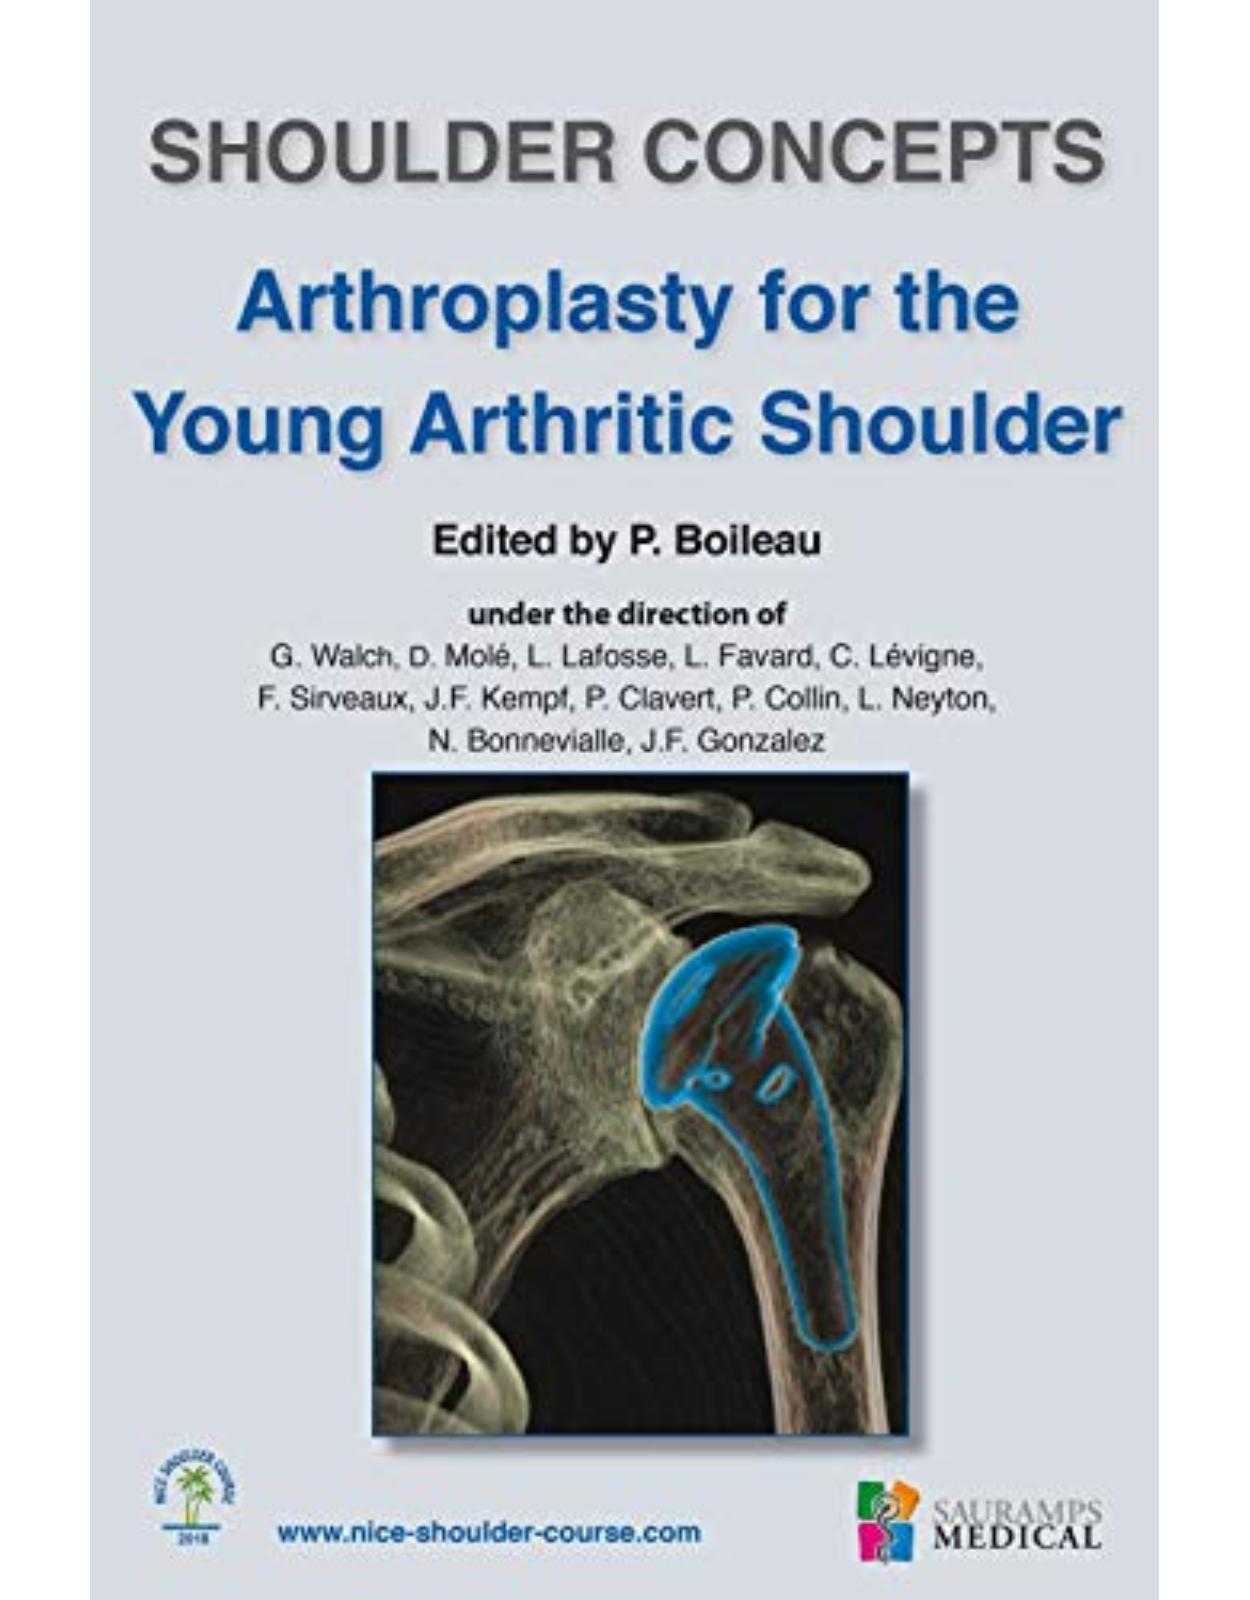 ARTHROPLASTY FOR THE YOUNG ARTHRITIC SHOULDER